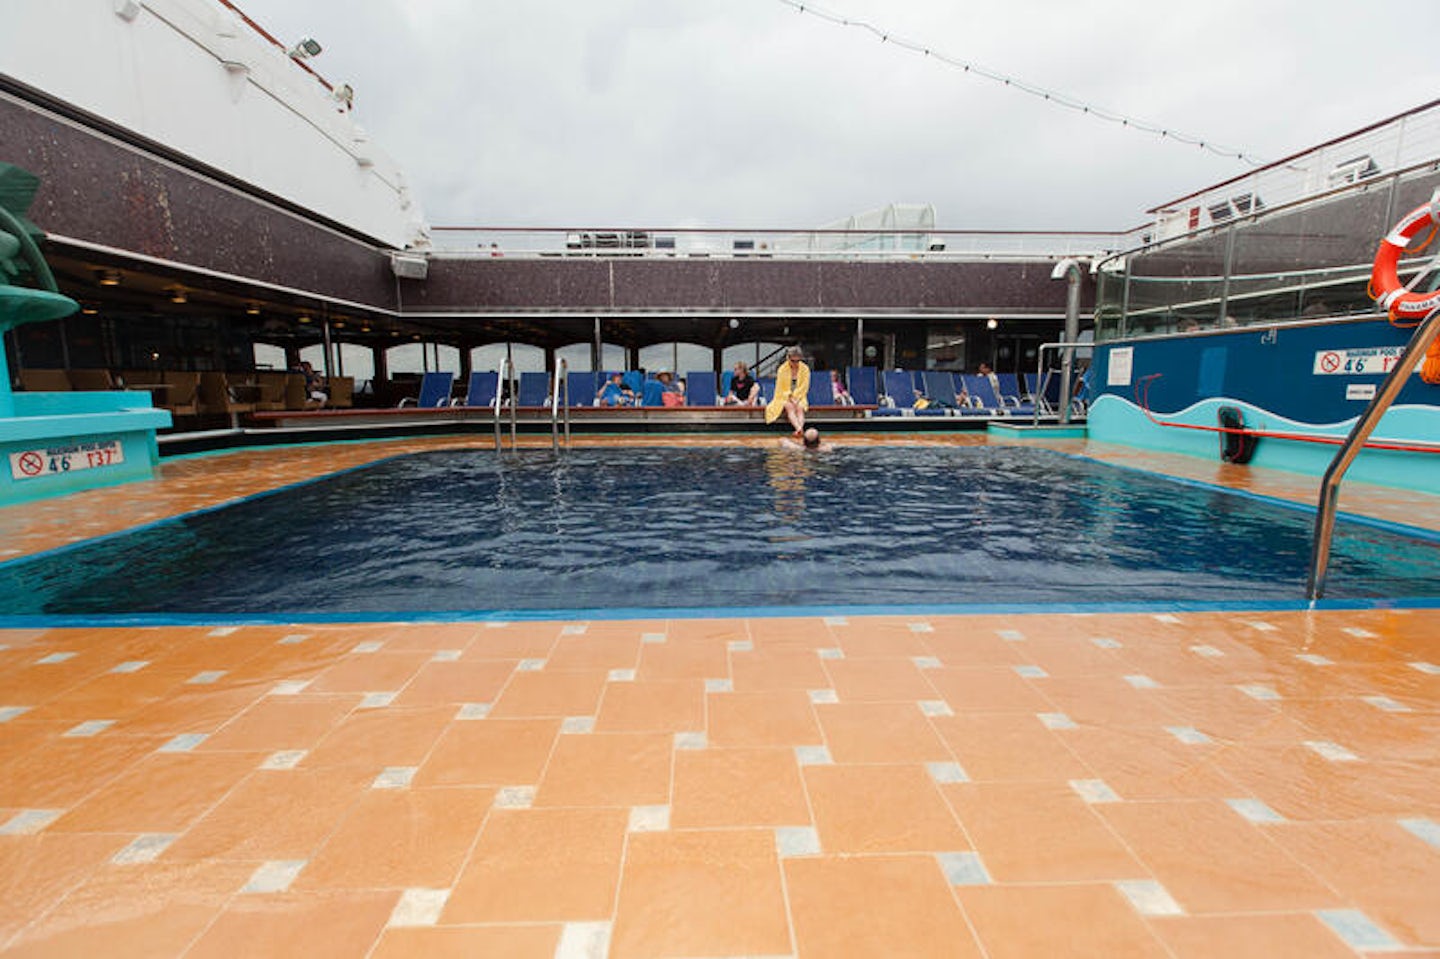 The Pool on Carnival Glory